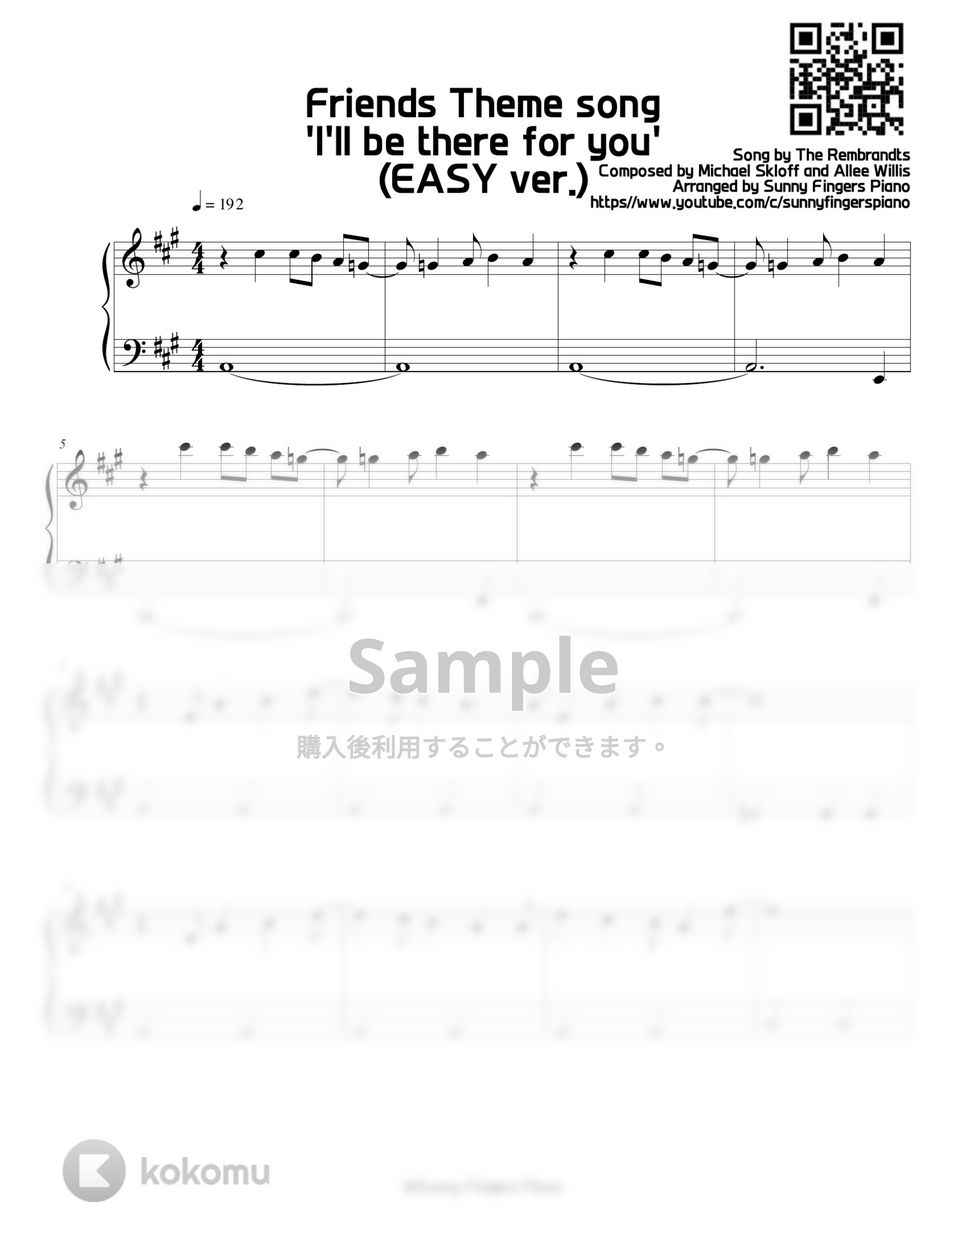 Friends Theme(opening) song - I'll be there for you (EASY ver.) by Sunny Fingers piano